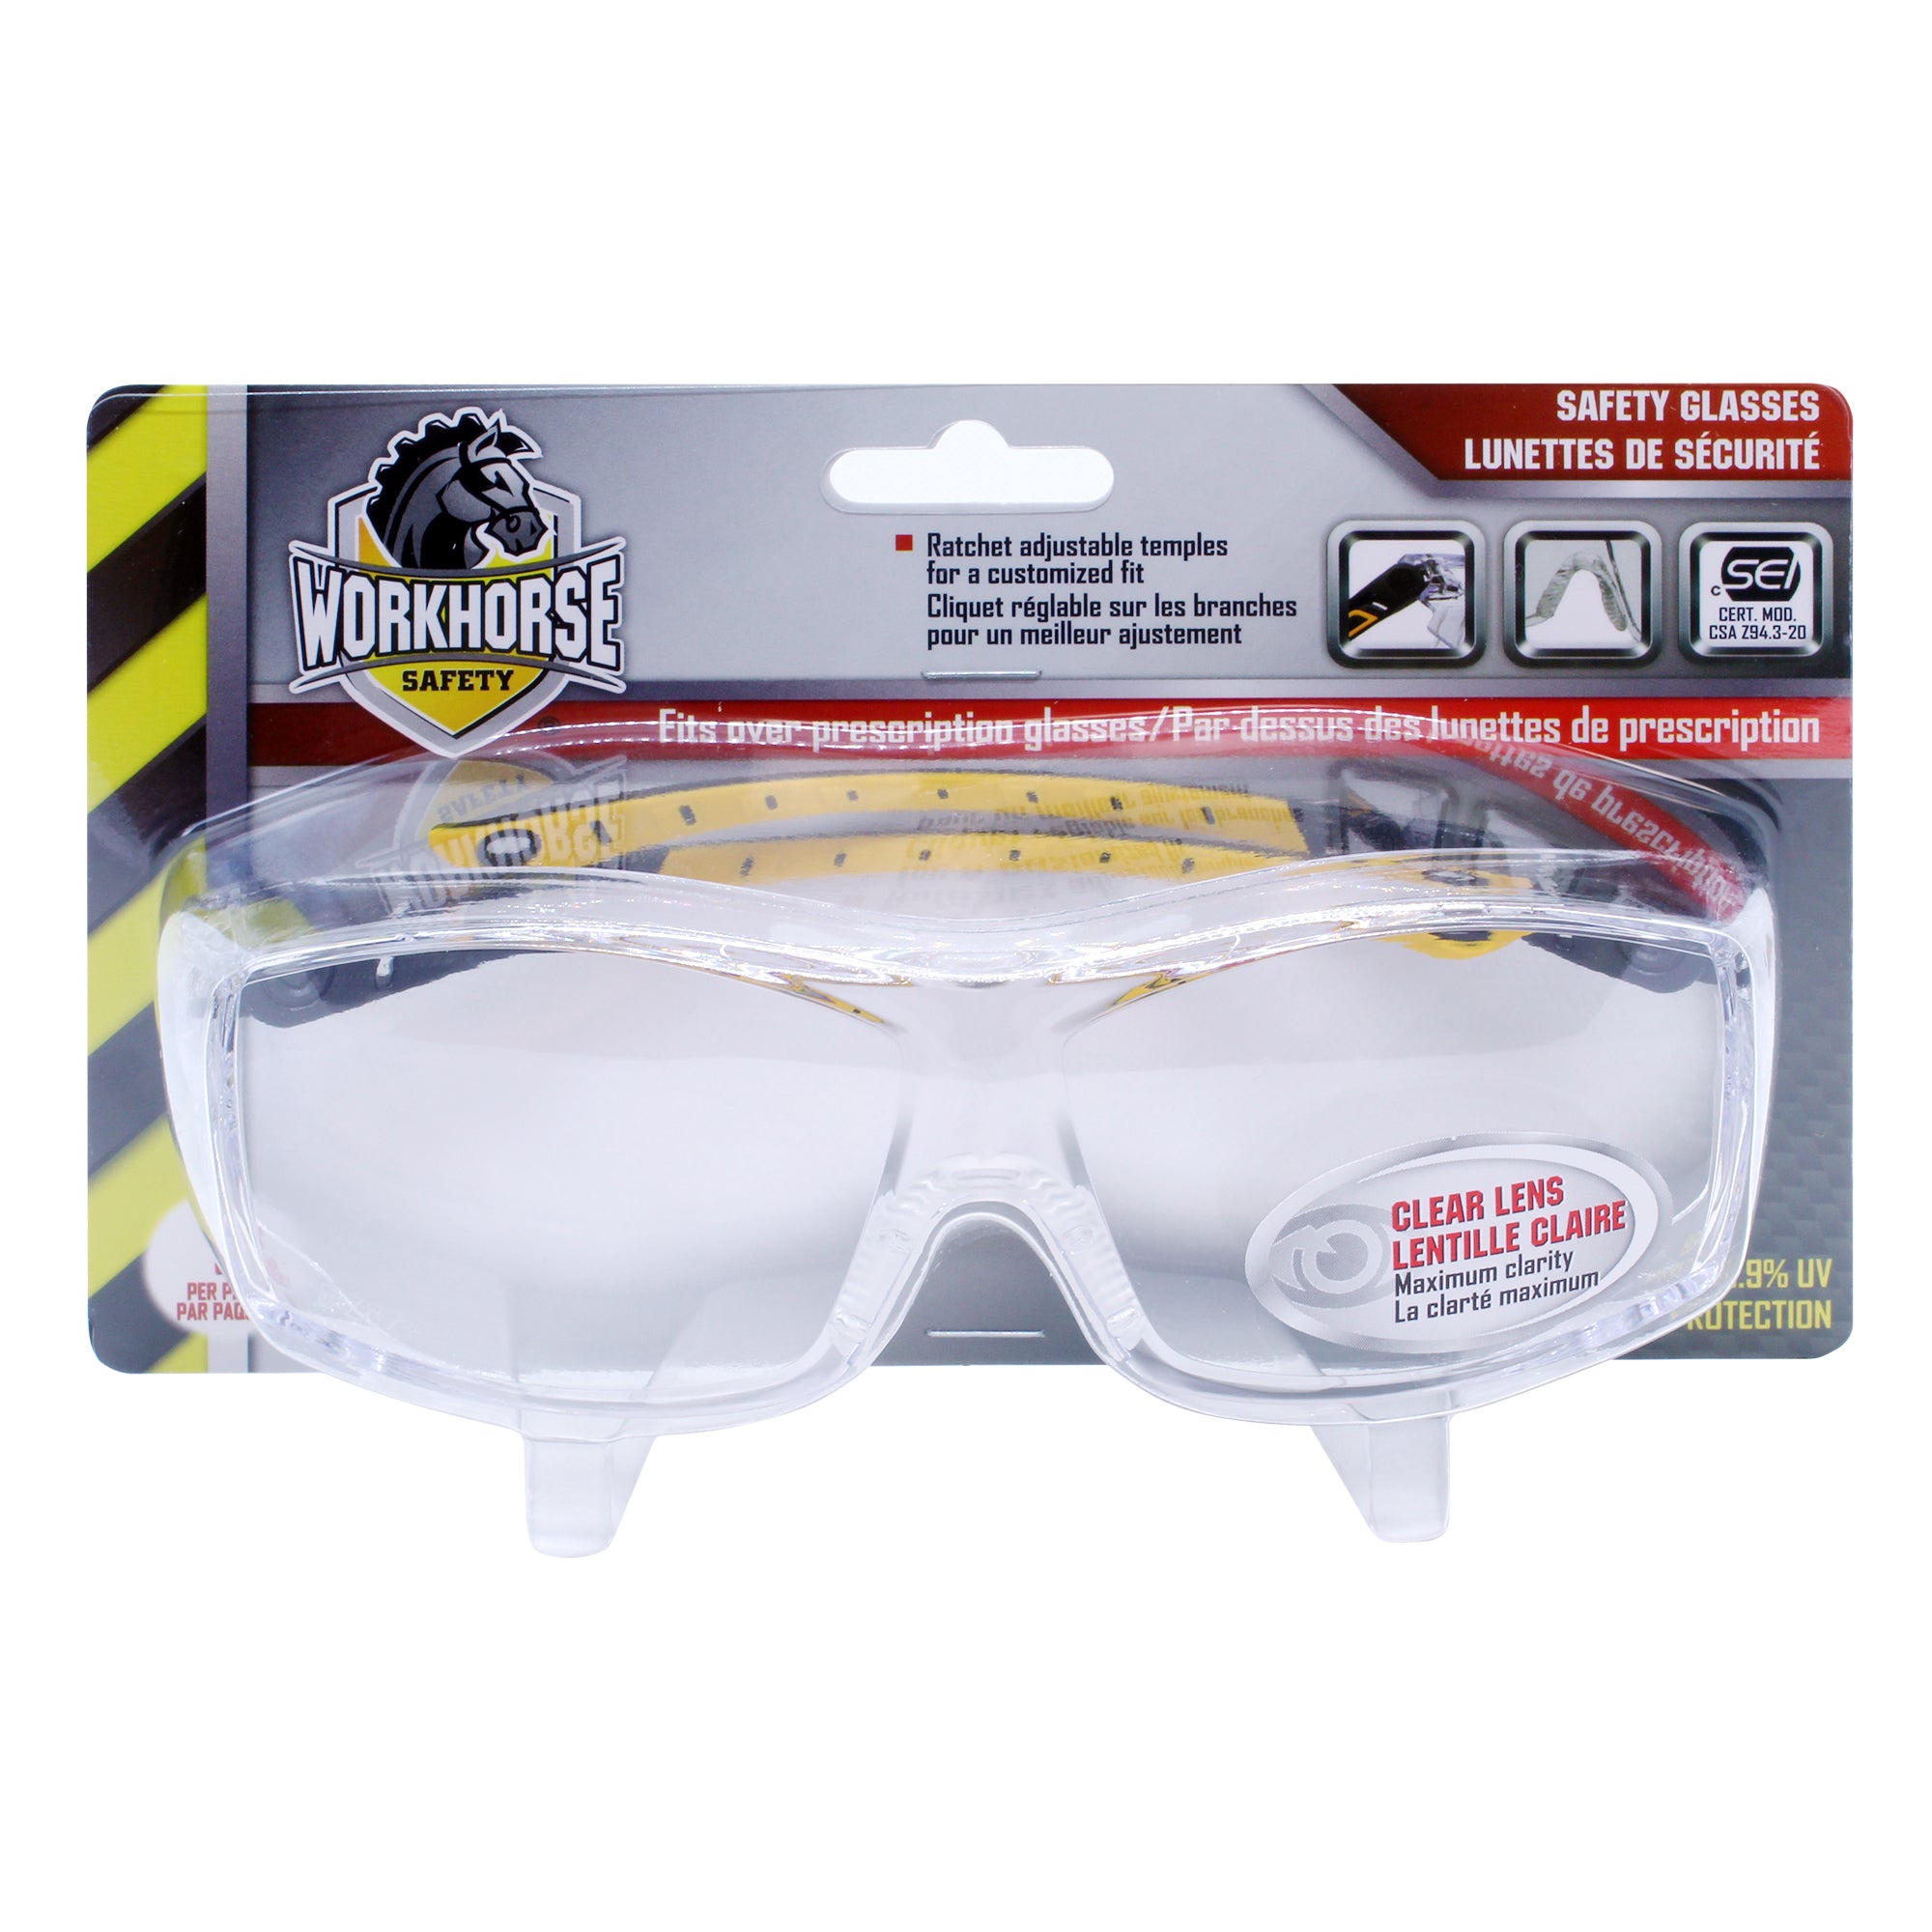 WORKHORSE® Clear OTG Safety Glasses with Anti-Scratch and Impact-Resistant Lens, Premium Anti-Fog and Ratchet Adjustable Temples to ensure a perfect fit